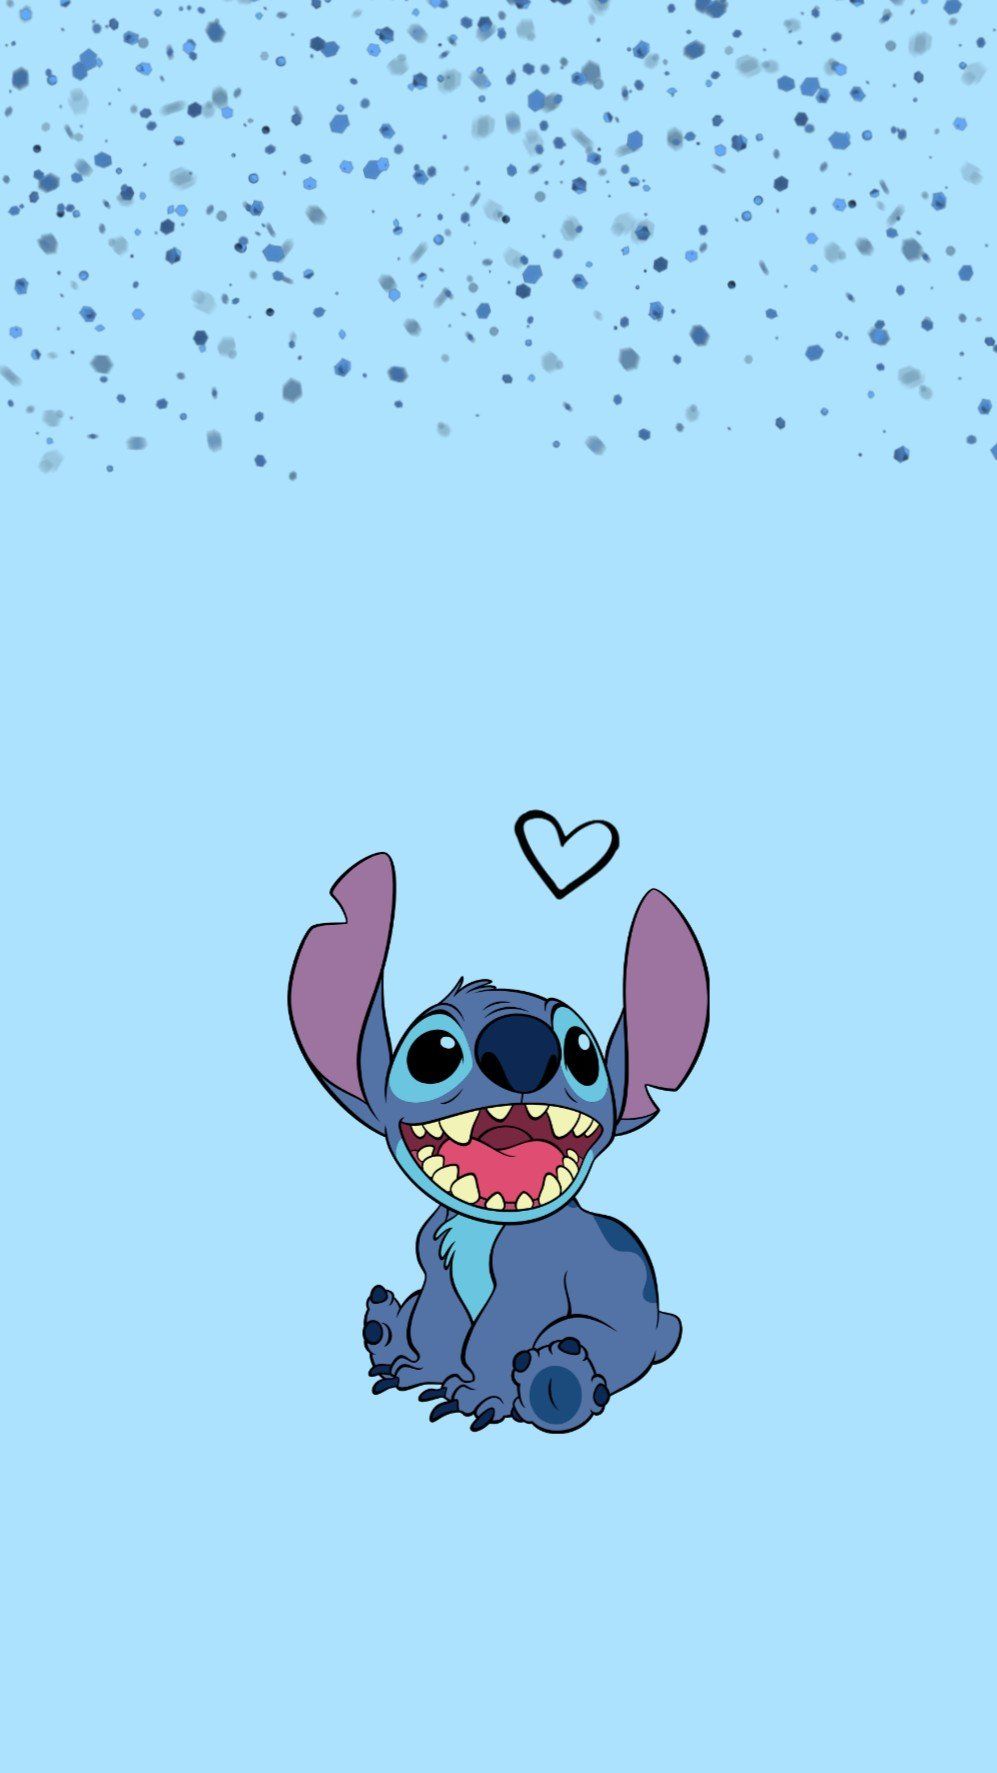 Lilo And Stitch Aesthetic Wallpapers Wallpaper Cave Cute stitch collection by camilitamjaldin. lilo and stitch aesthetic wallpapers